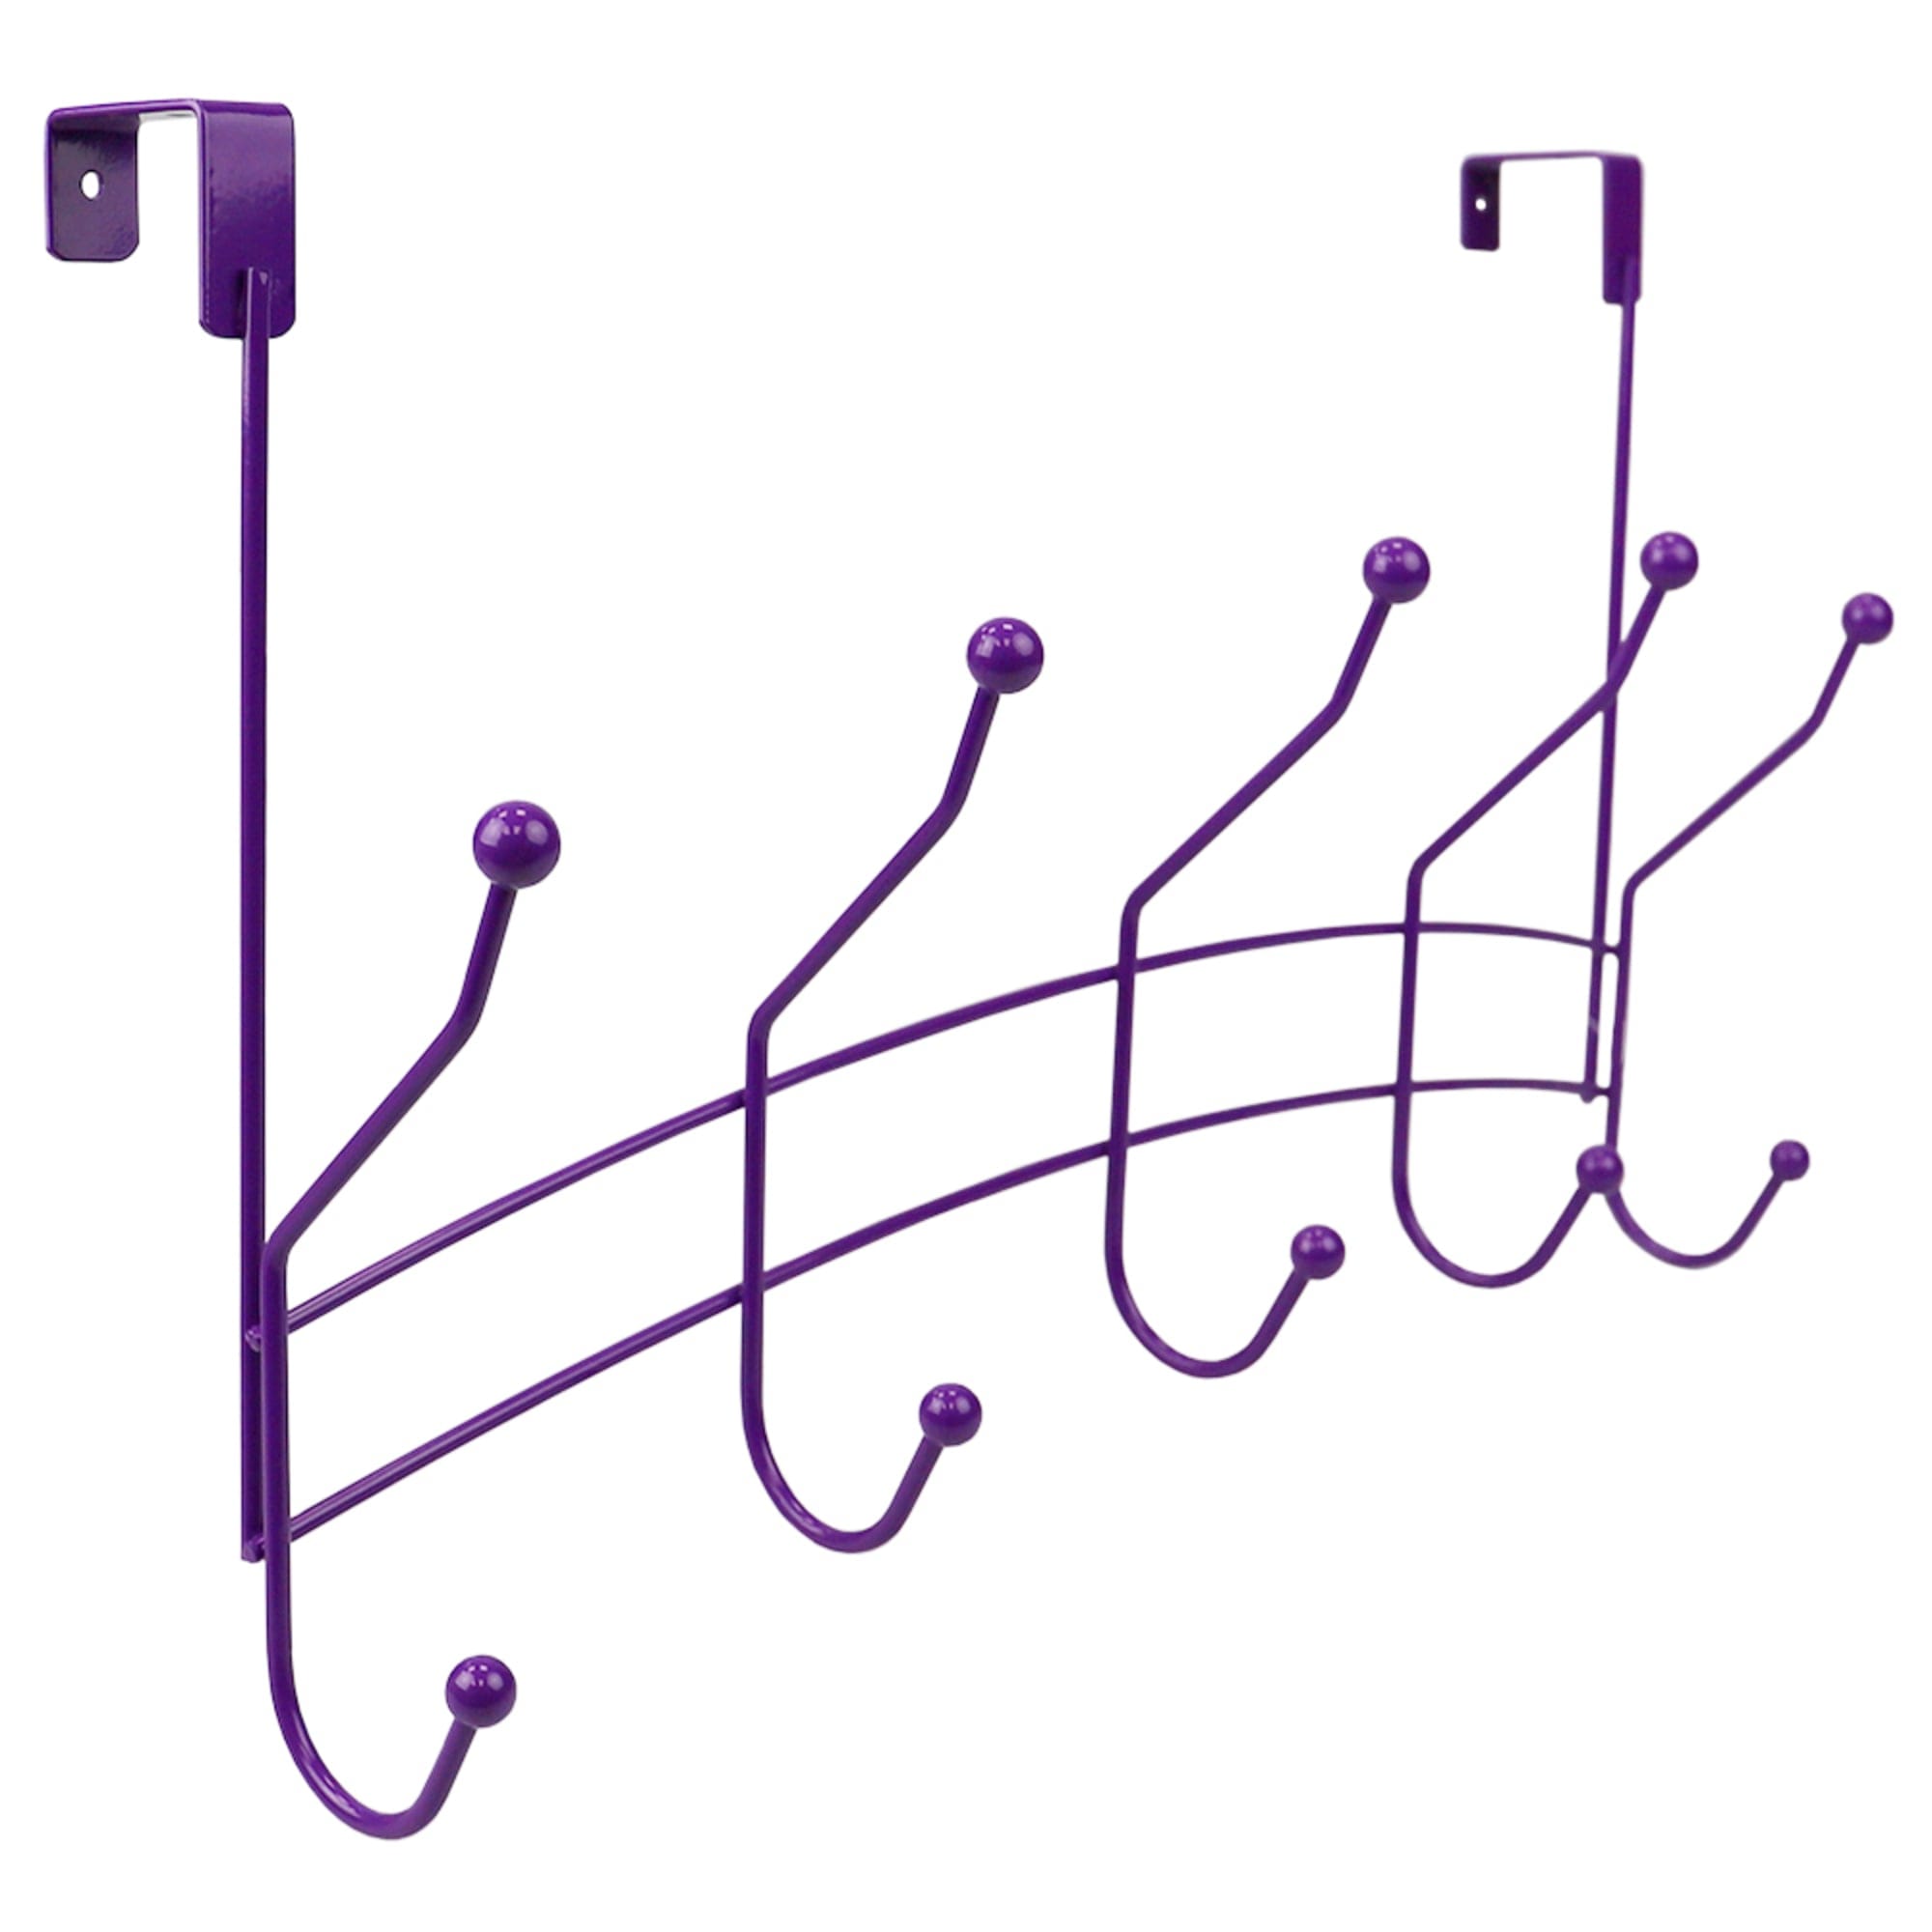 Home Basics Shelby 5 Hook Over the Door Hanging Rack, Purple $6.00 EACH, CASE PACK OF 12